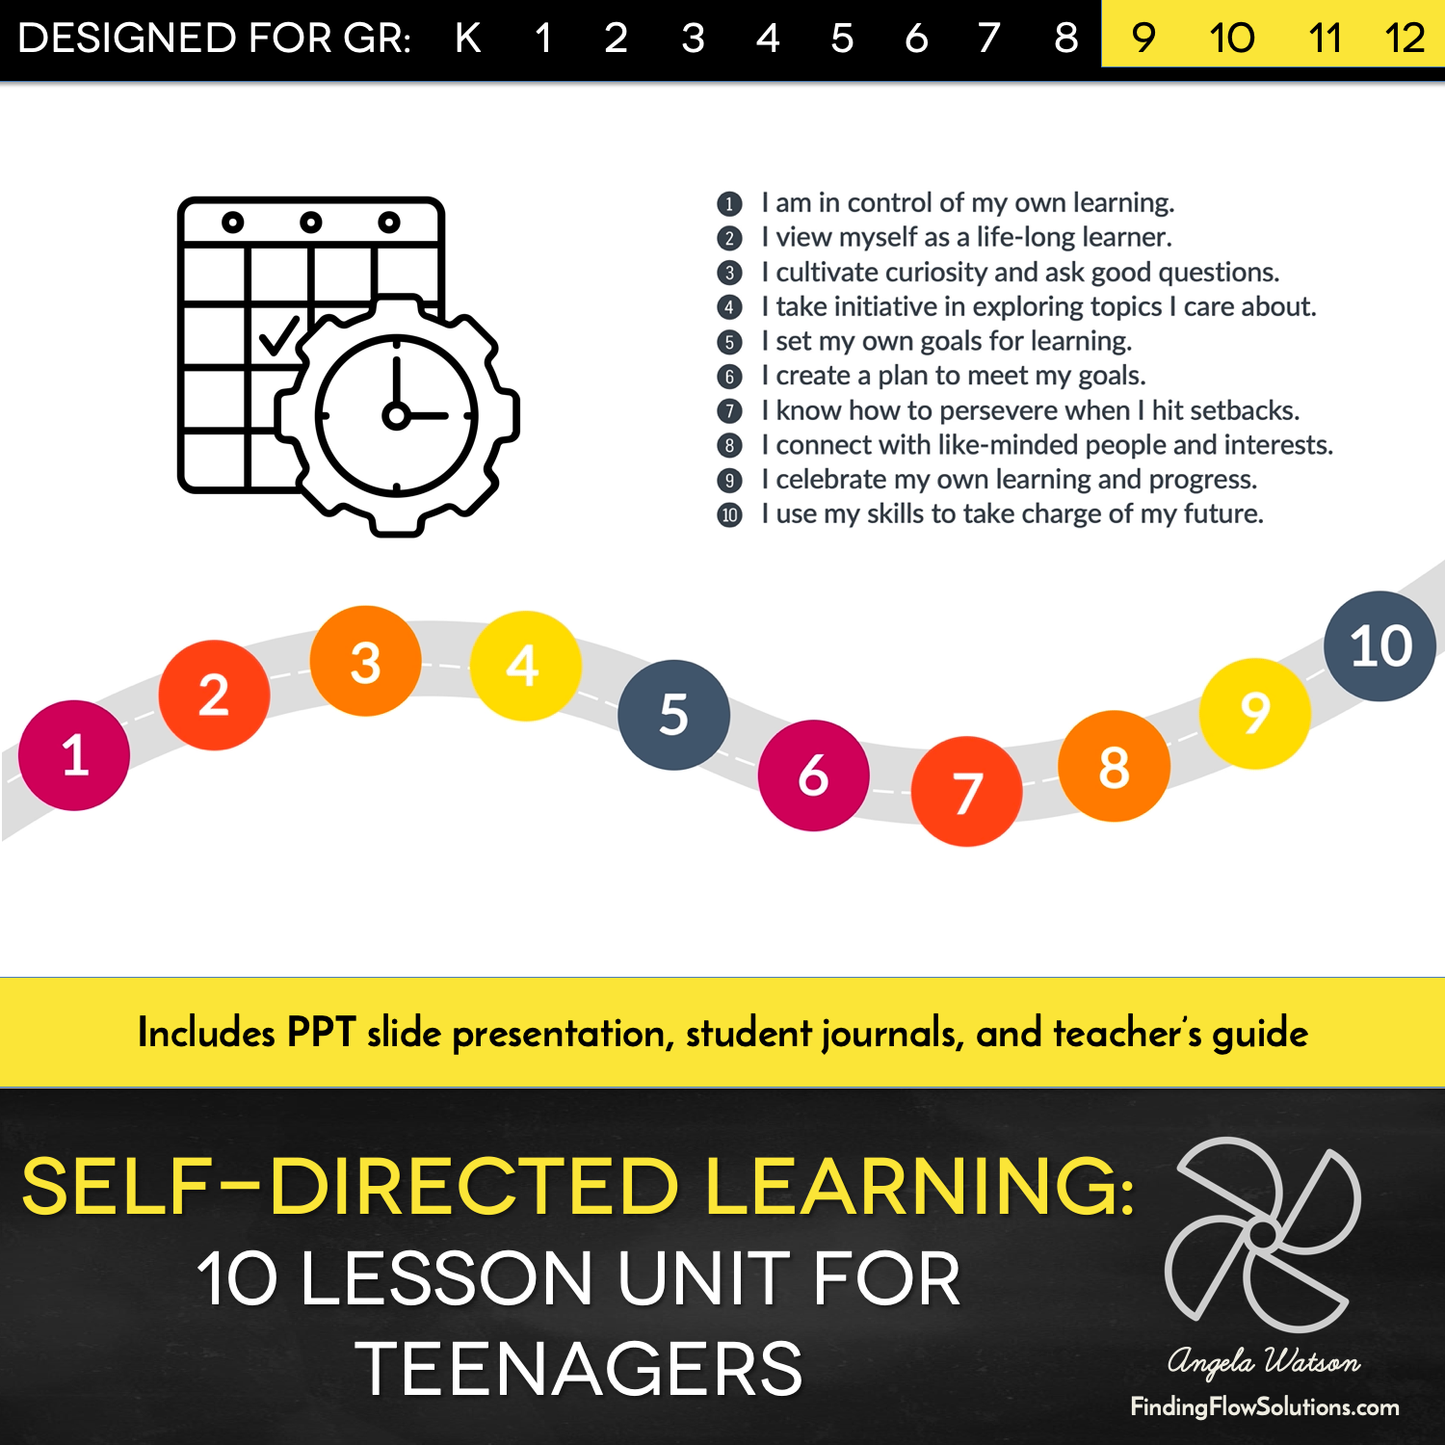 Self-Directed Learning Unit: 10 lessons to prepare students for PBL